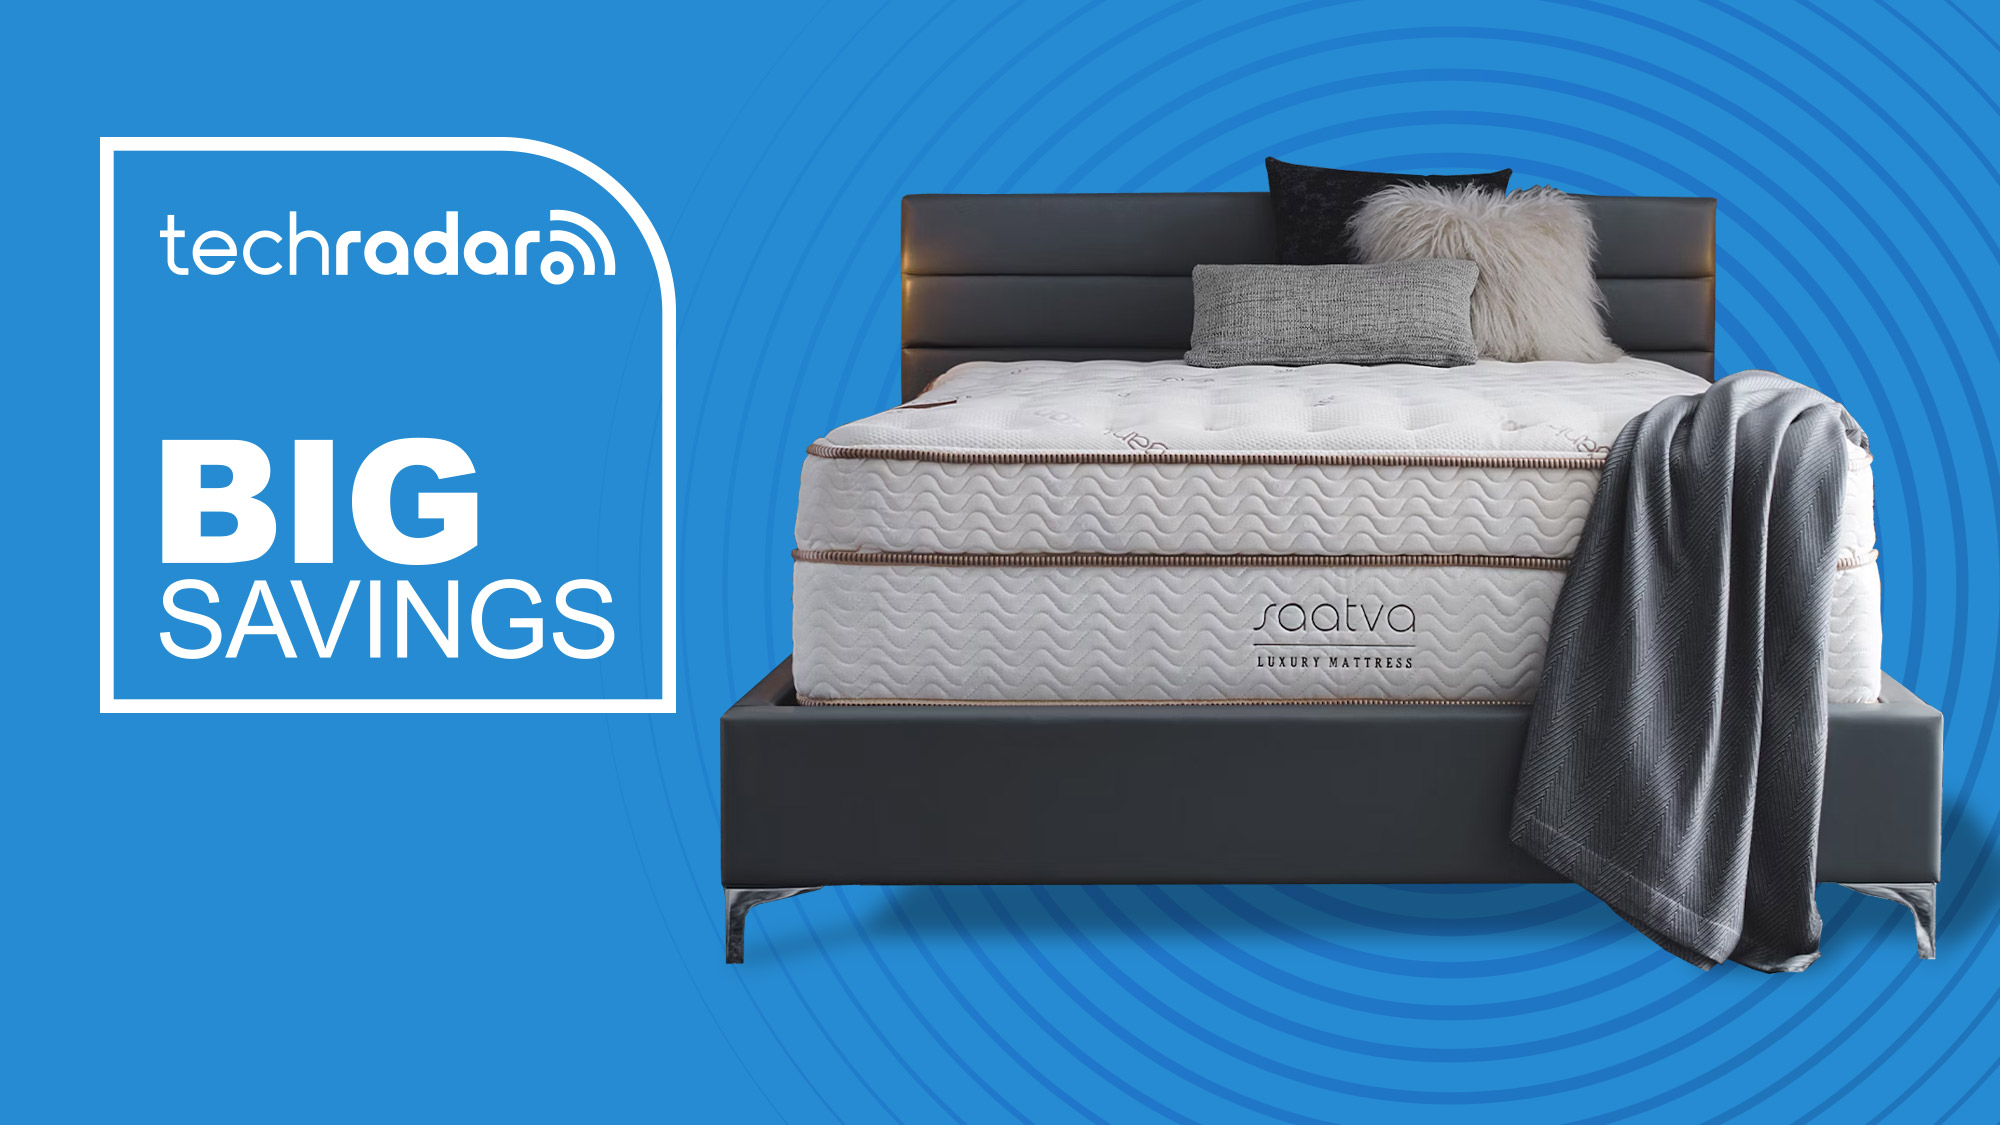 Save up to £500 on a premium mattress